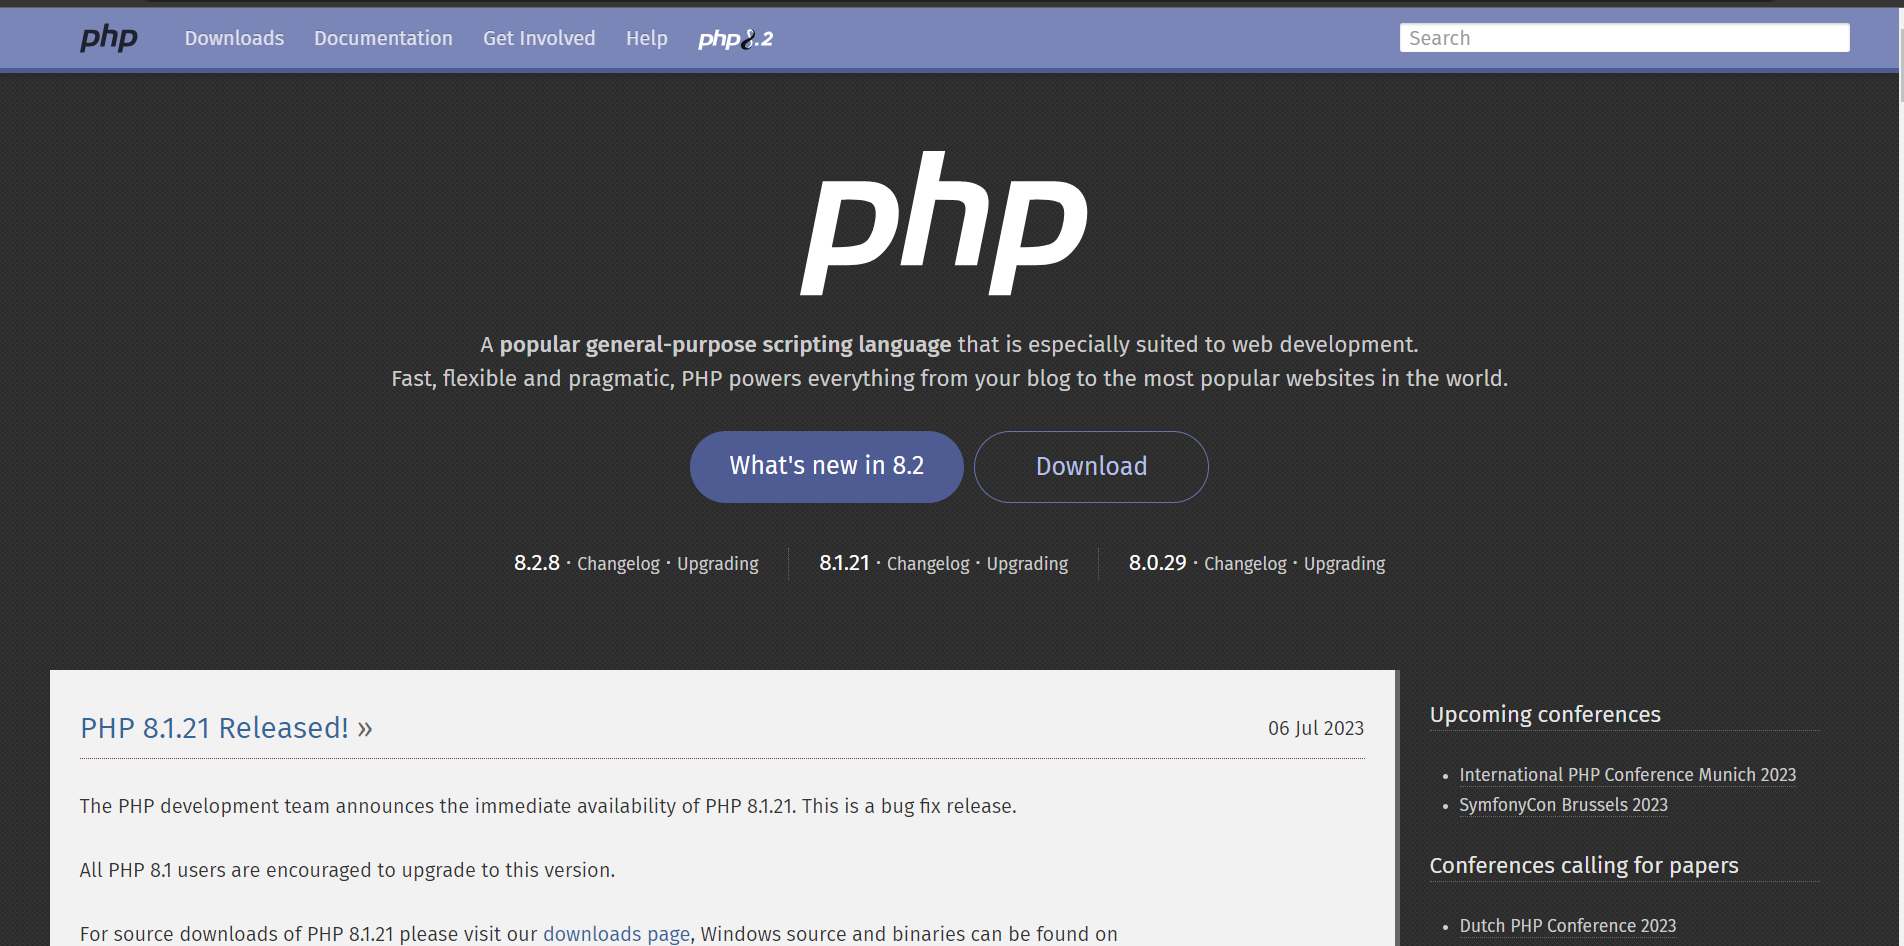 PHP is an open-source language